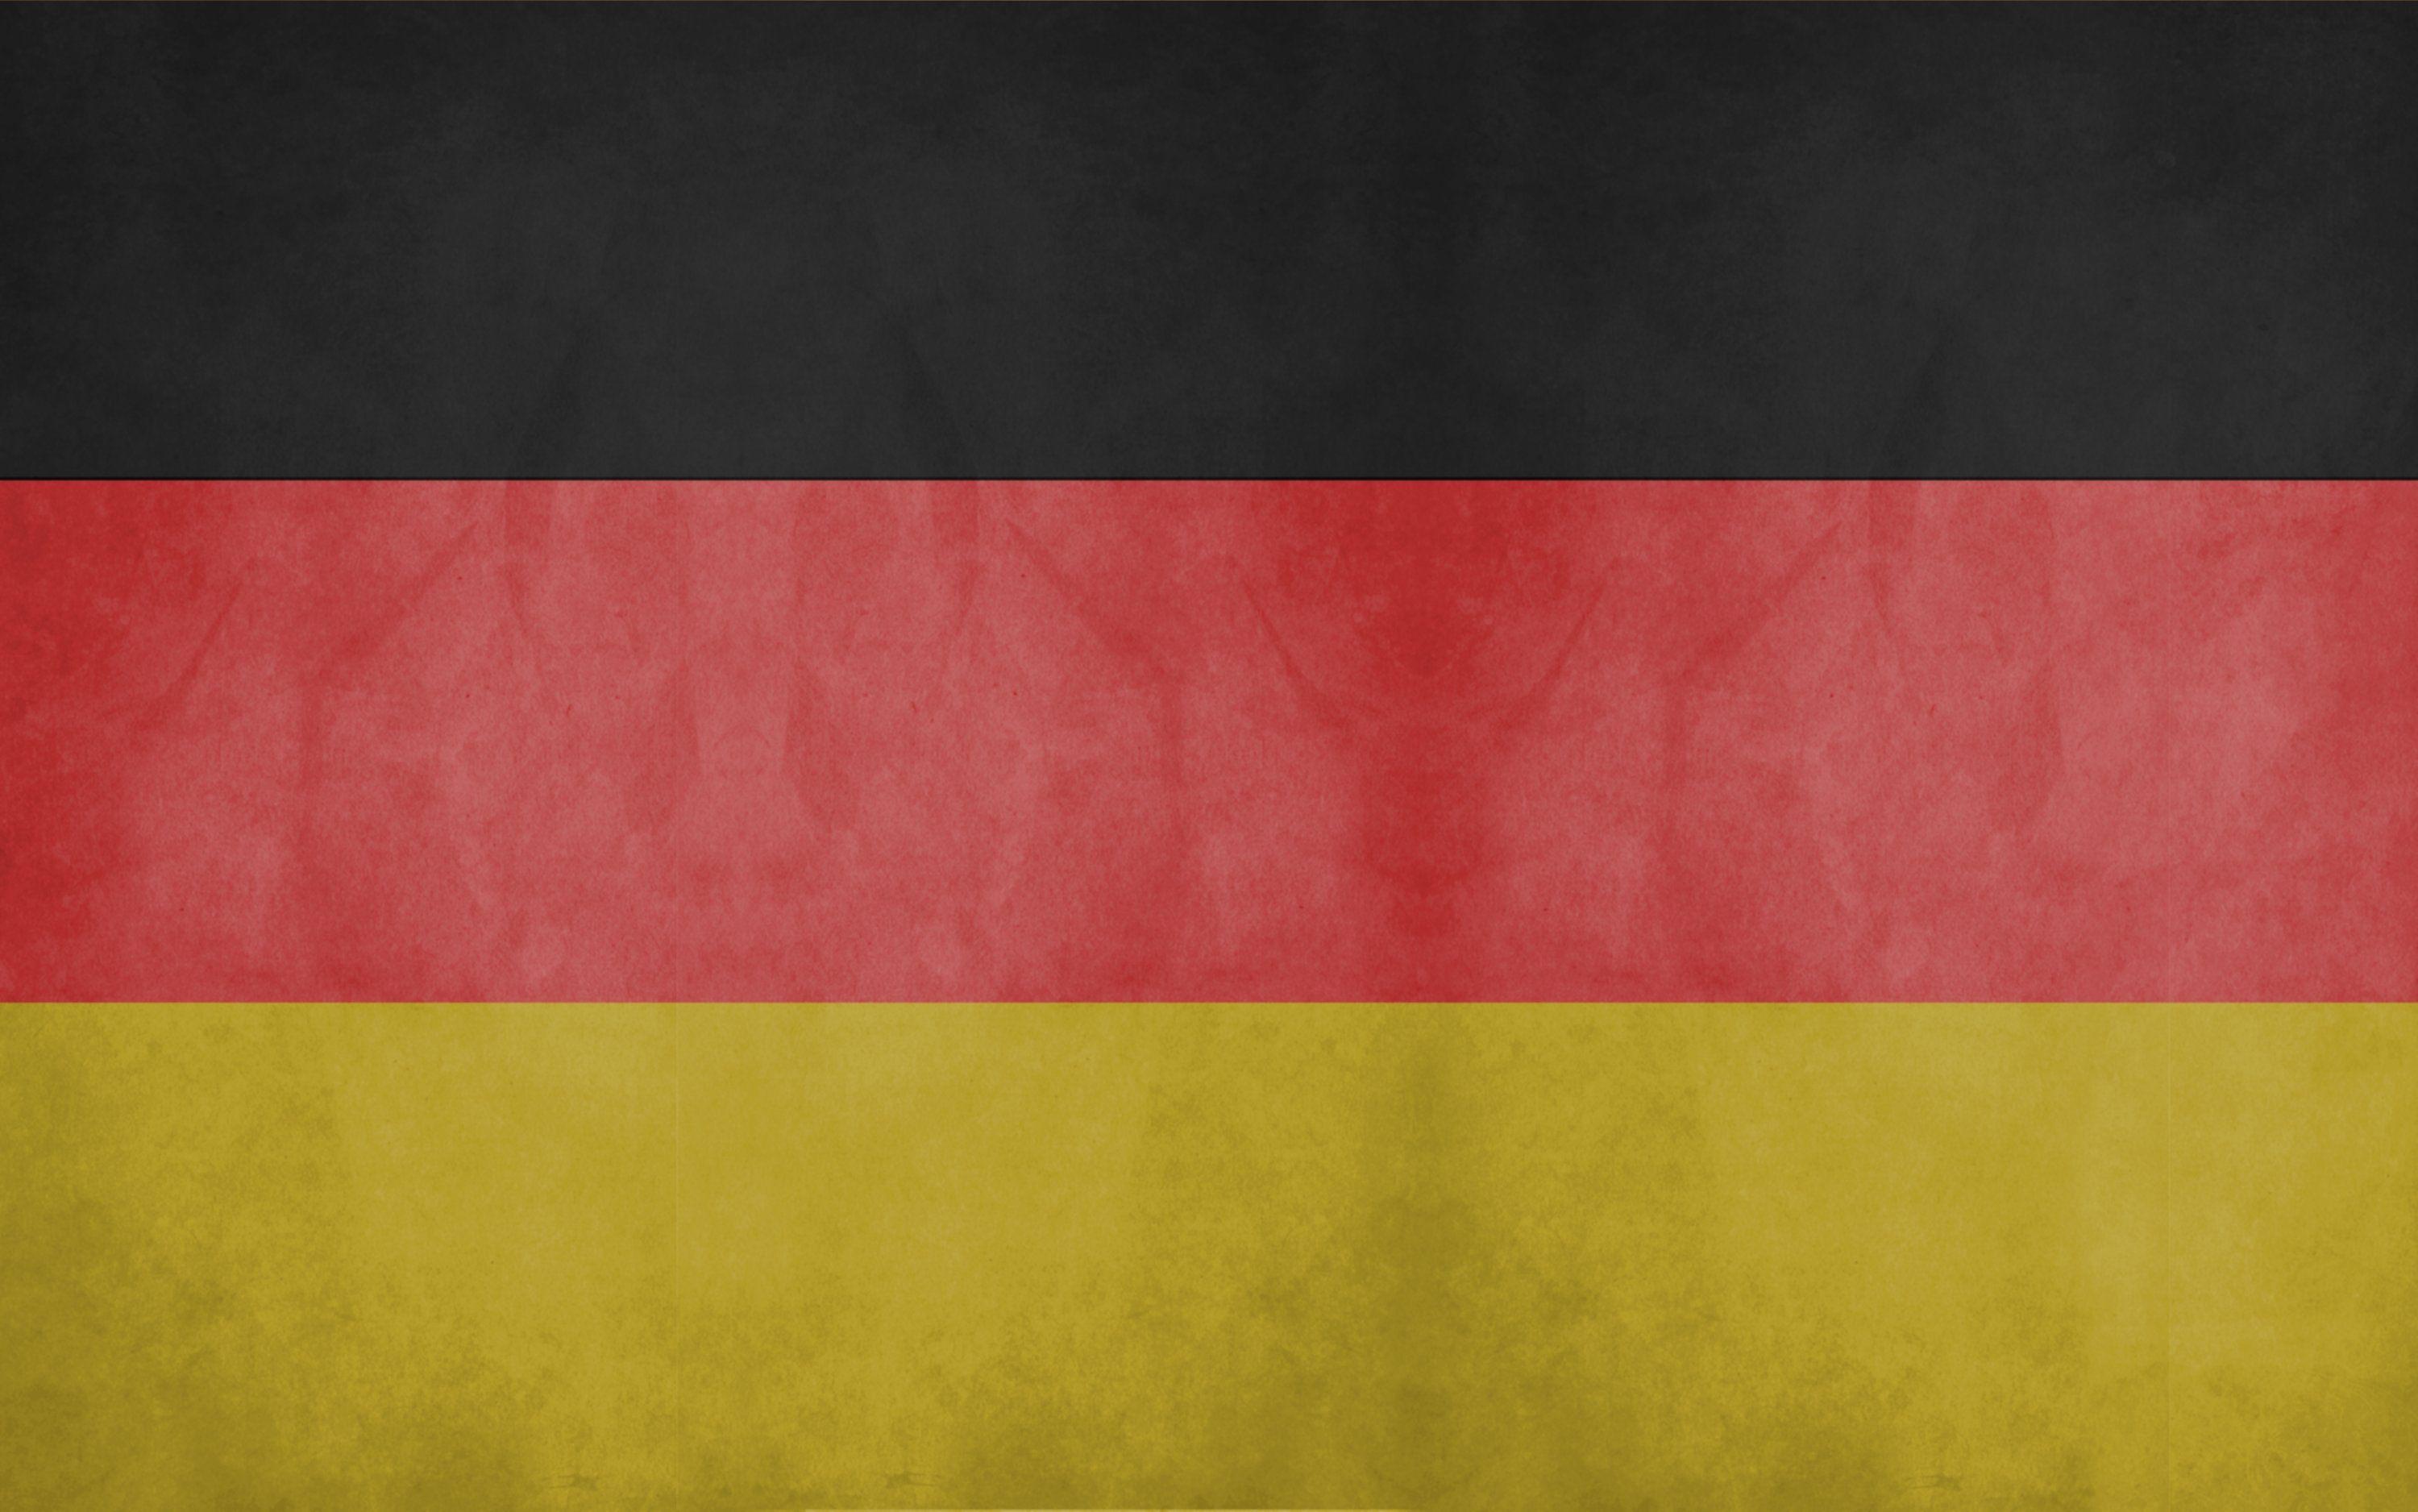 Free Germany Flag Background For PowerPoint and Textures